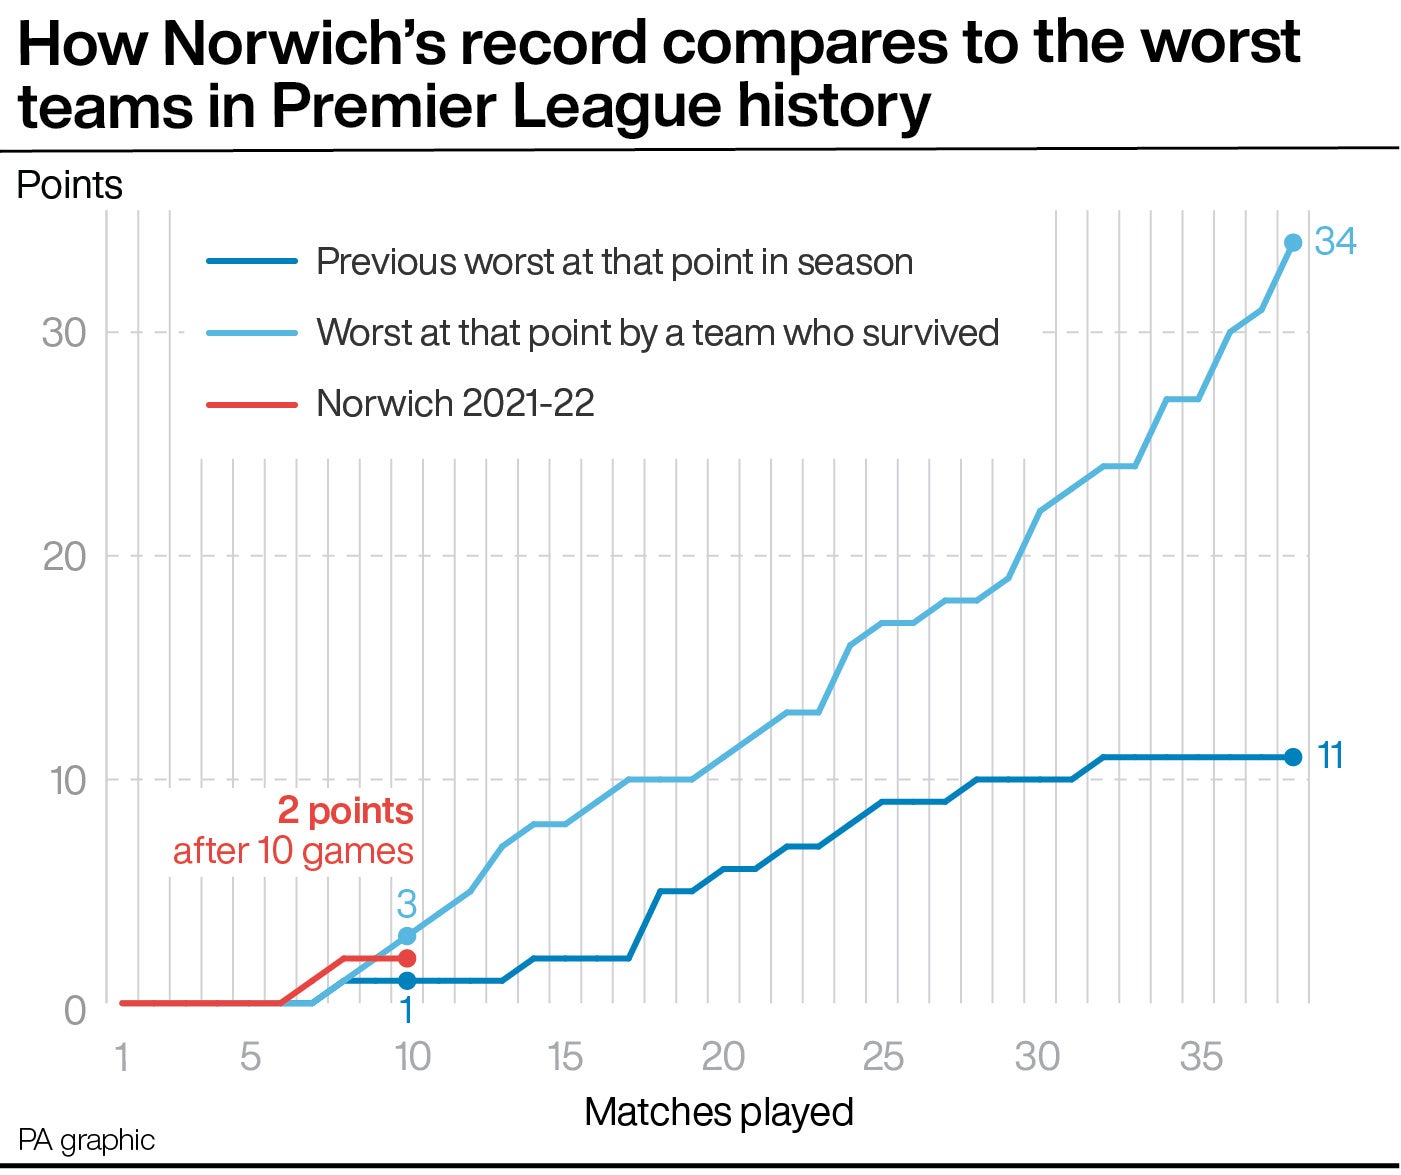 Norwich have dipped below the lowest points total at this stage for a surviving team (PA graphic)